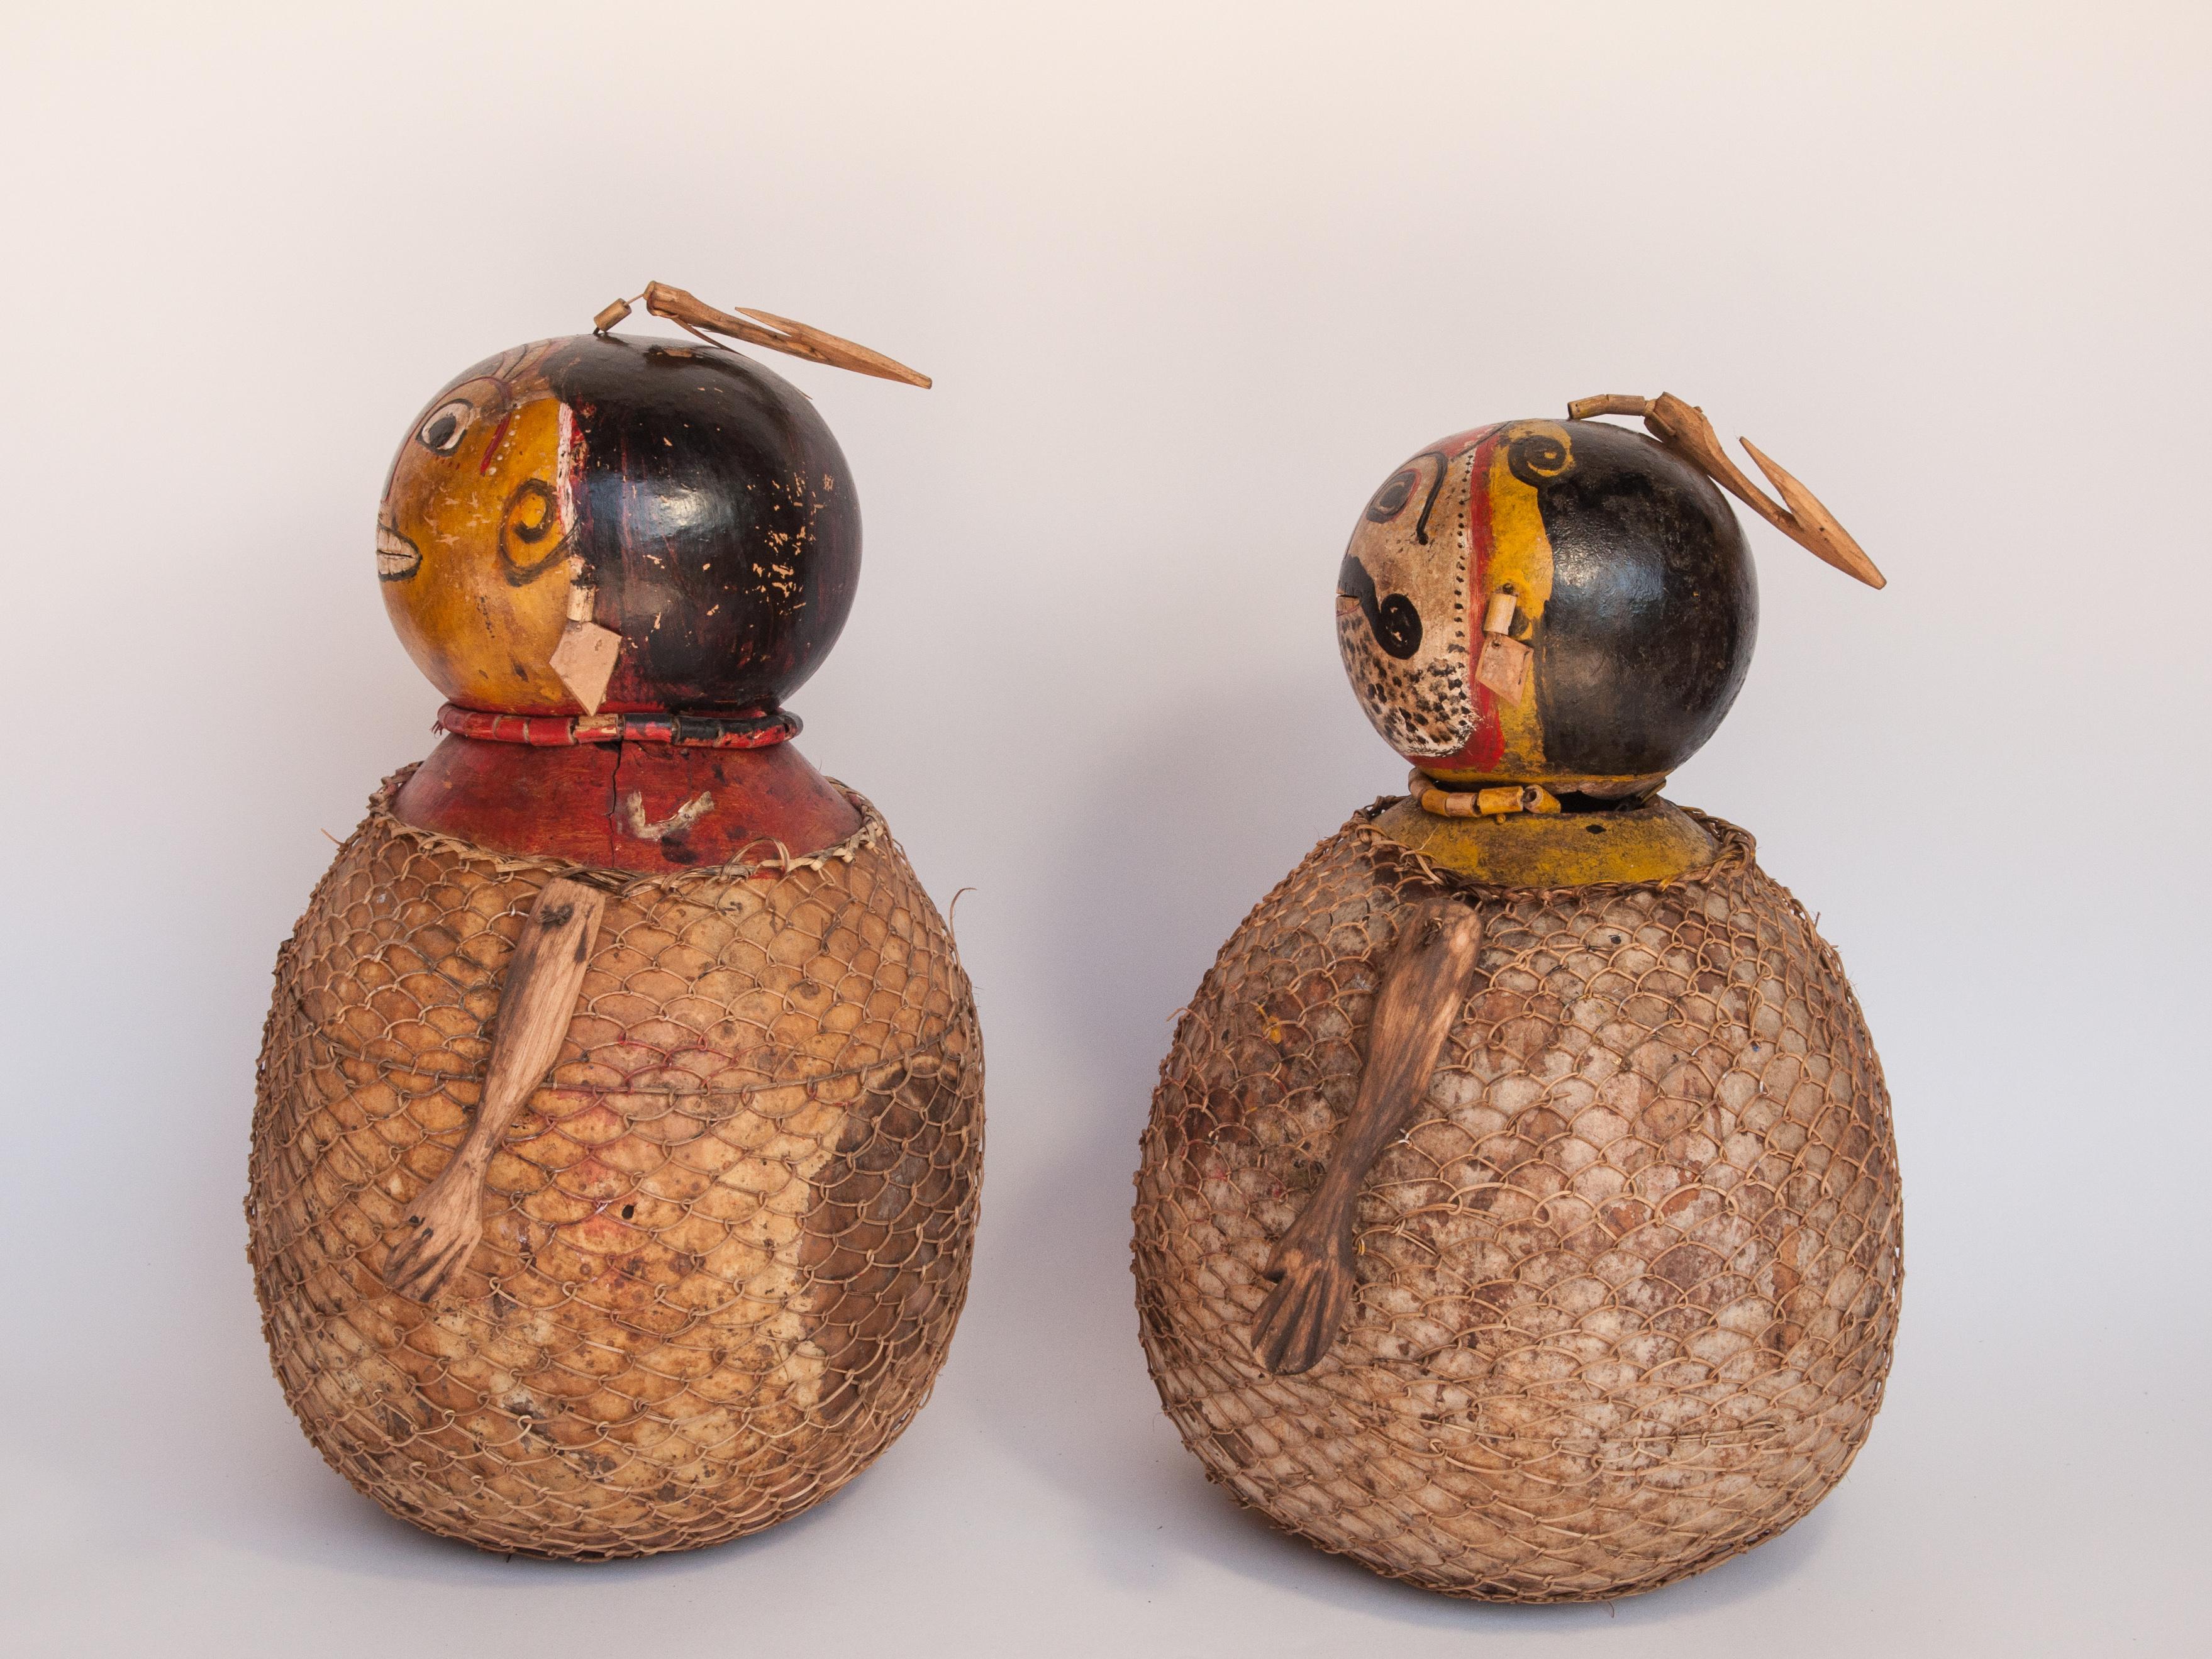 Hand-Crafted Vintage Painted Gourd Couple, Folk Art from Lombok, Indonesia, Late 20th Century